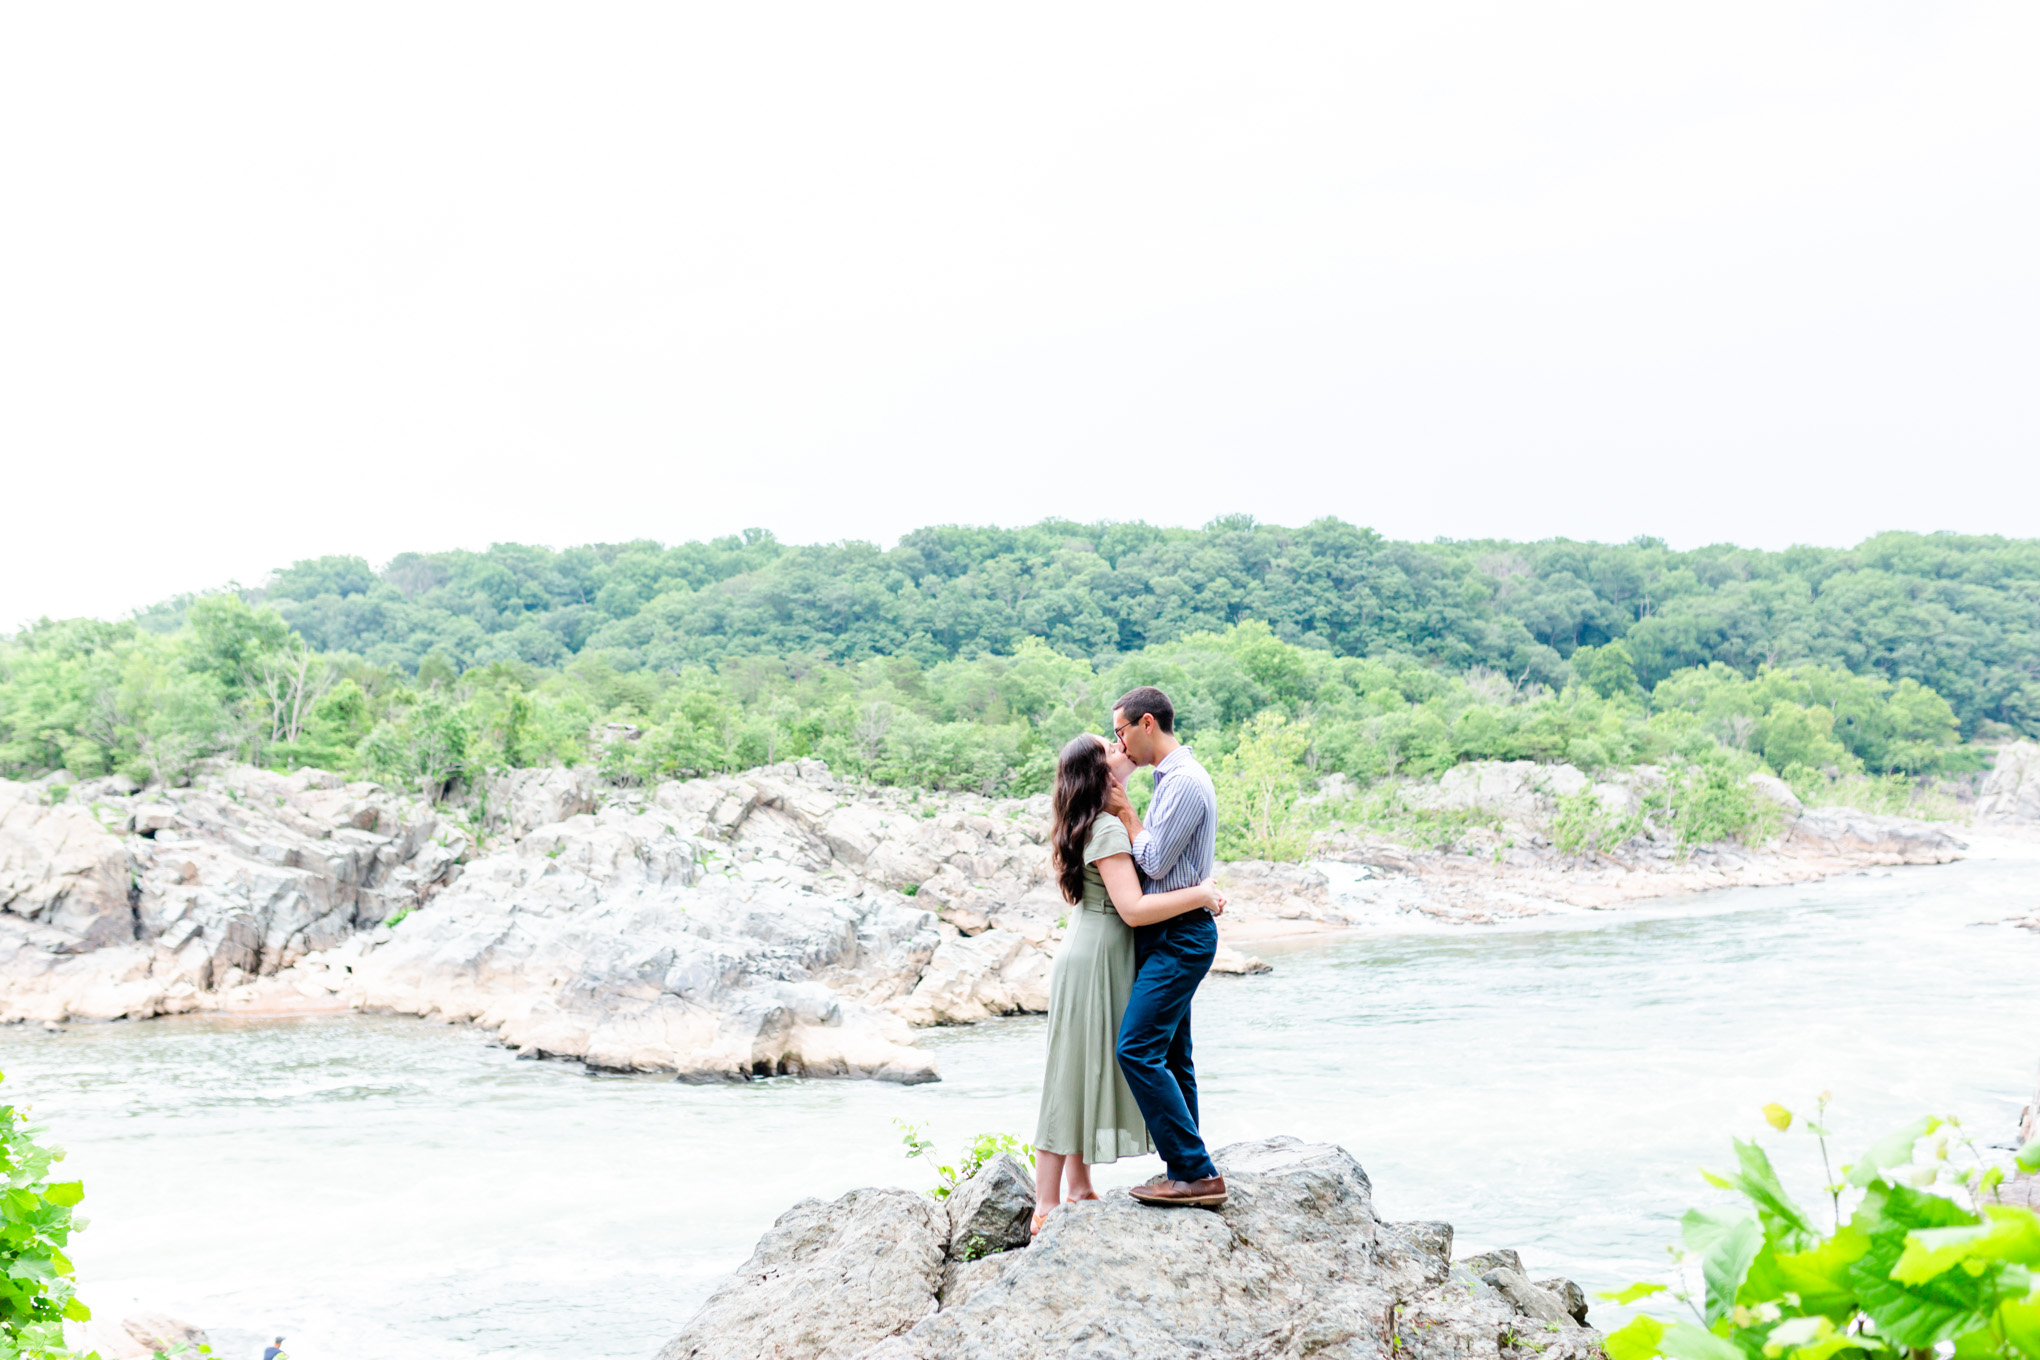 Great Falls Park engagement photos, Great Falls Park, Great Falls Virginia, national park, Great Falls, Great Falls engagement photos, Virginia engagement photos, Virginia engagement photographer, Rachel E.H. Photography, engaged couple, engagement session style, outdoorsy engagement photos, hiking engagement photos, couple kissing, epic portrait